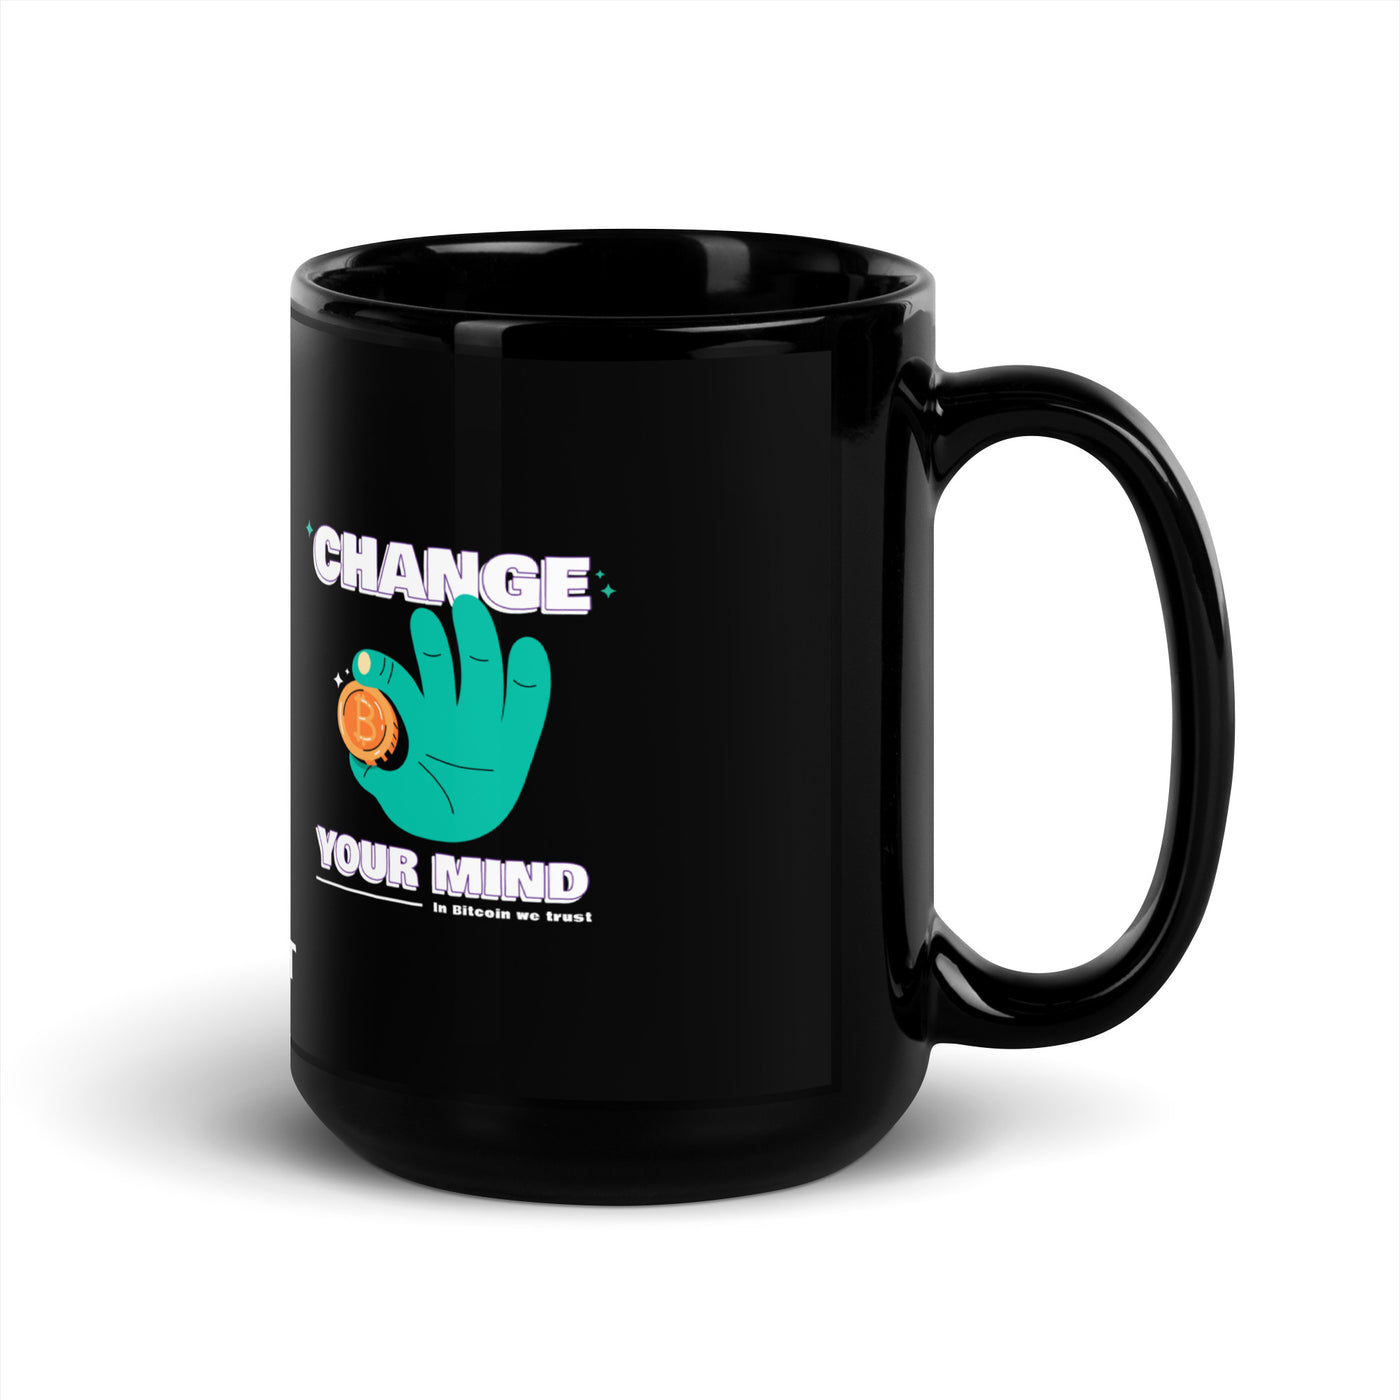 Change your mind in Bitcoin we Trust - Black Glossy Mug